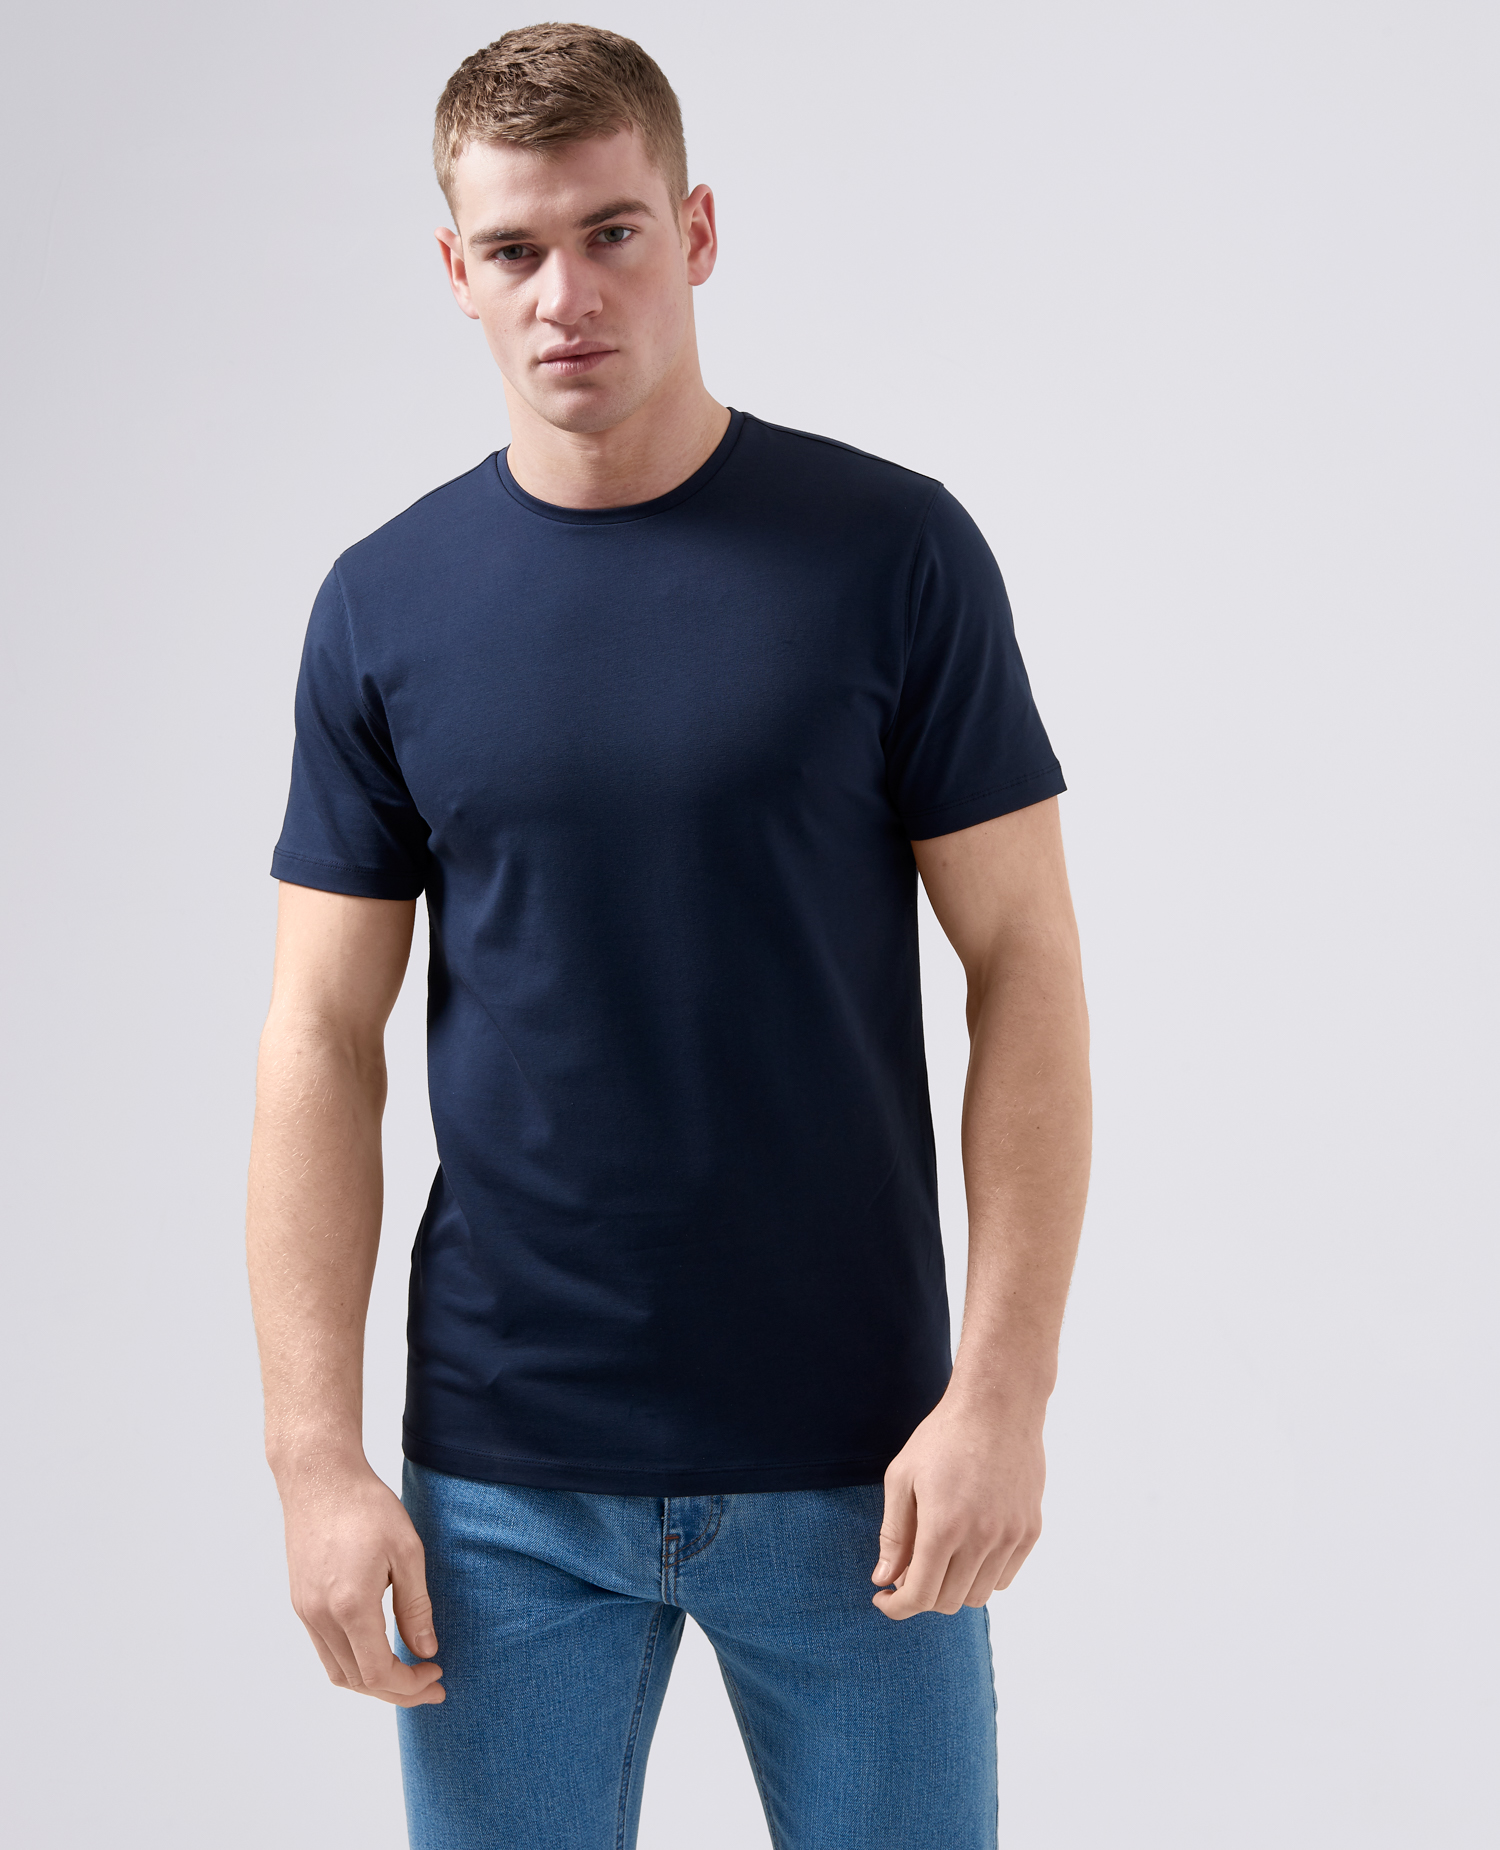 REMUS NAVY STRETCH TEE - Morans Menswear and Clothing, Thurles, Co ...